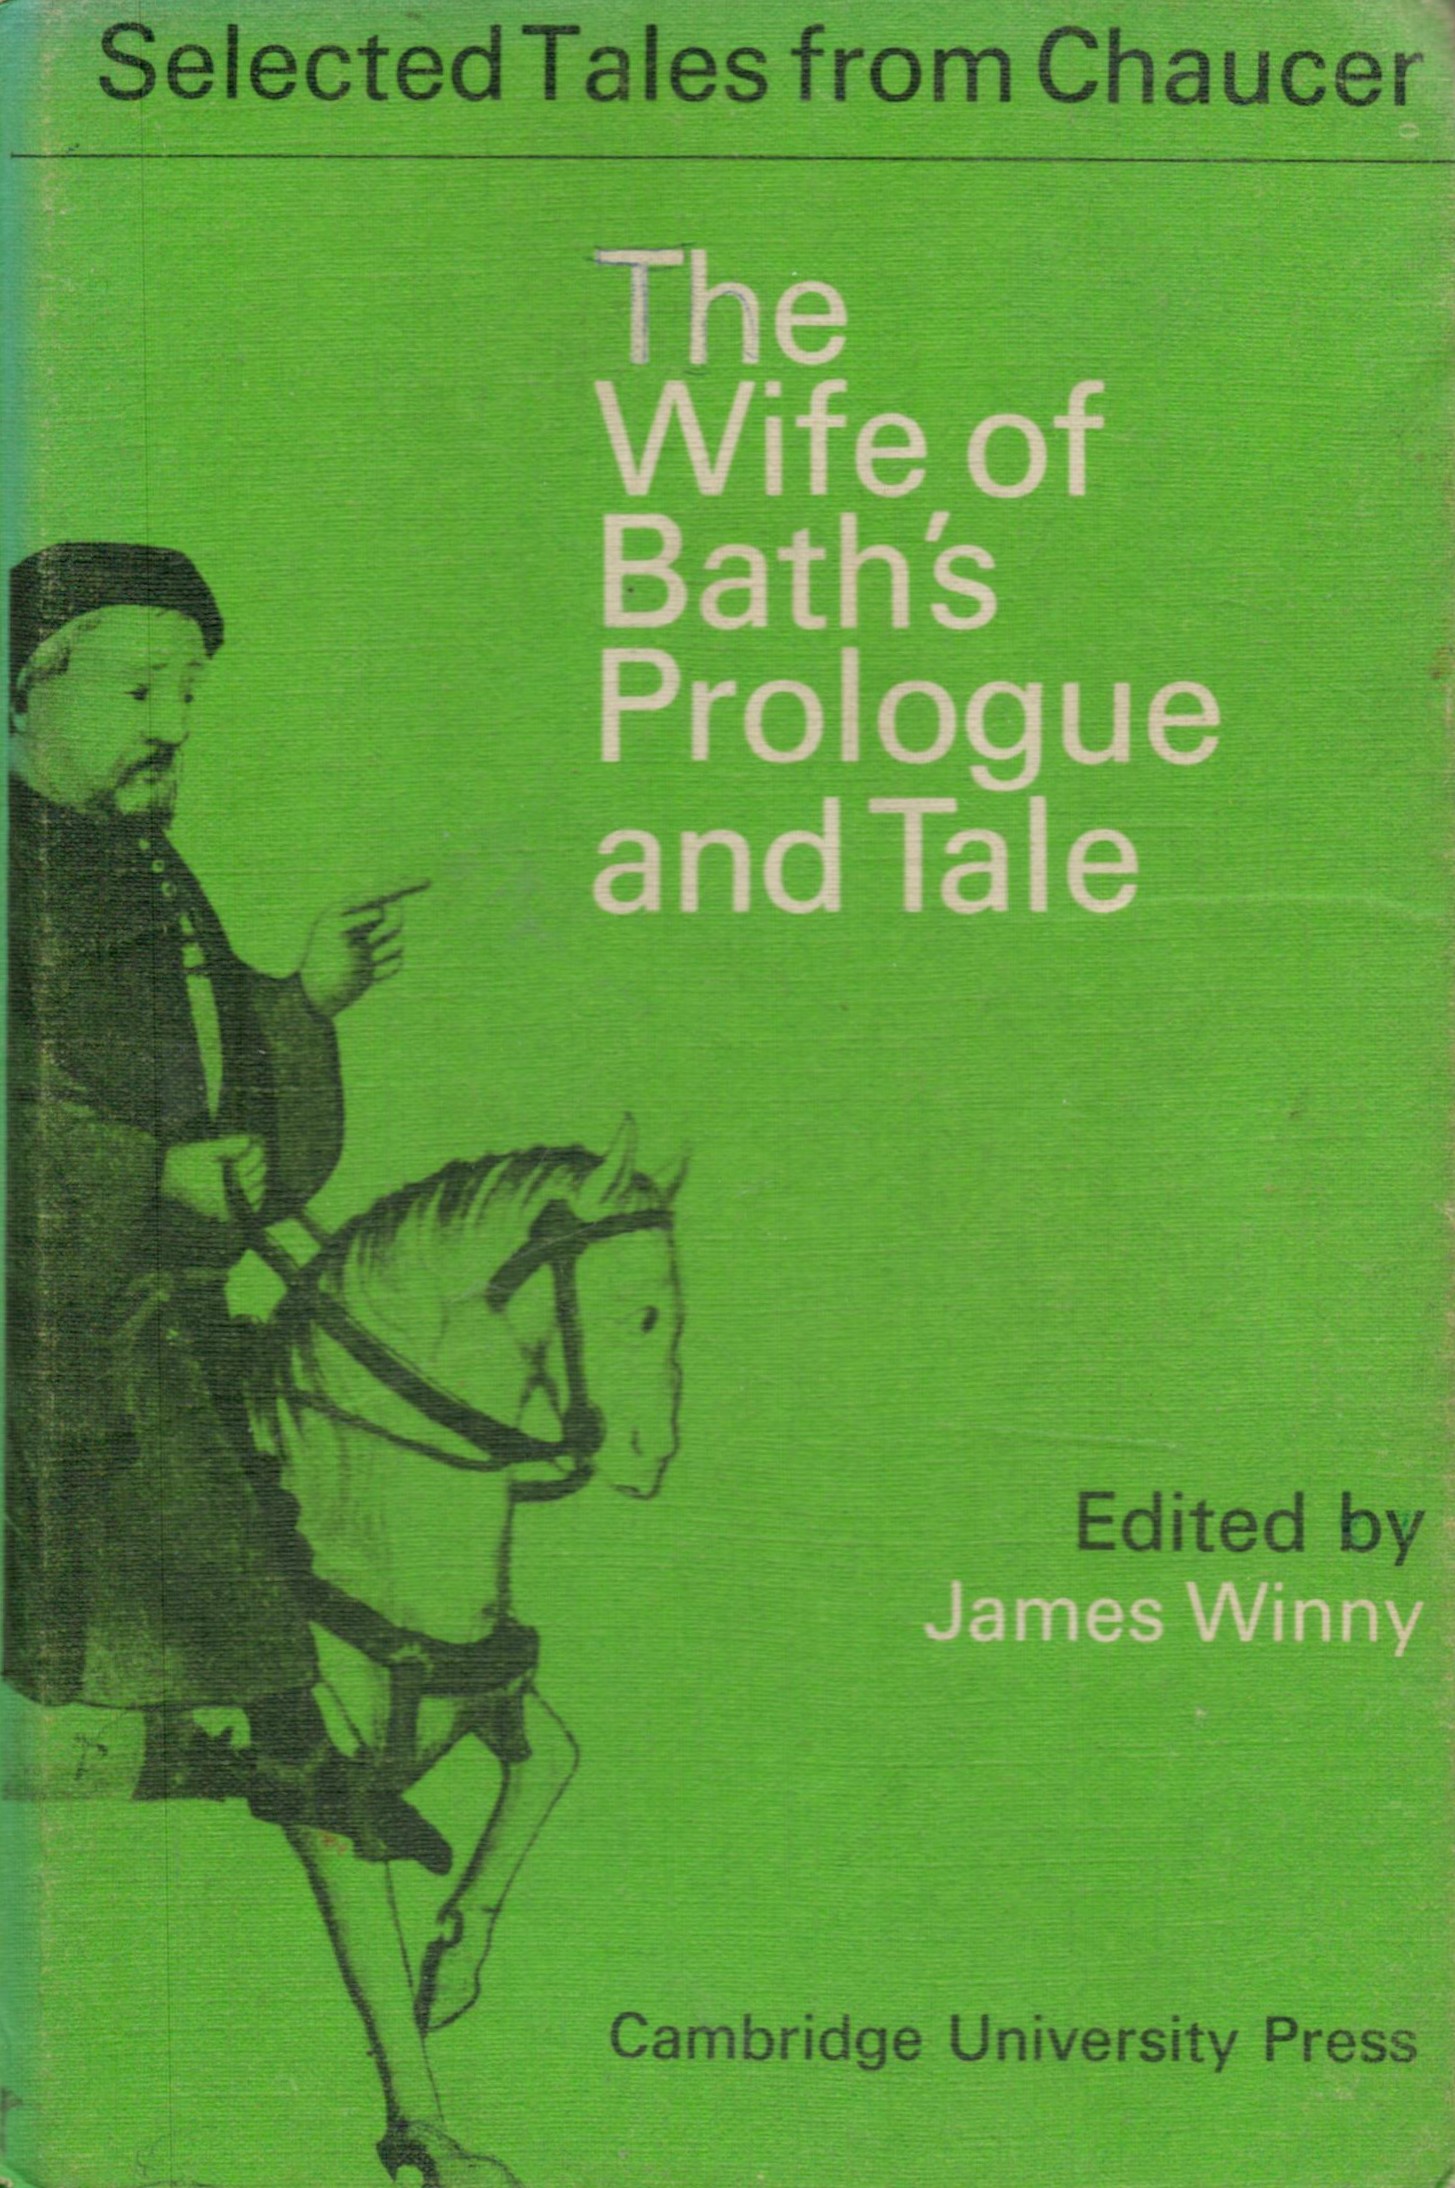 Selected Tales from Chaucer The Wife of Bath's Prologue and Tale Edited by James Winny 1969 Second